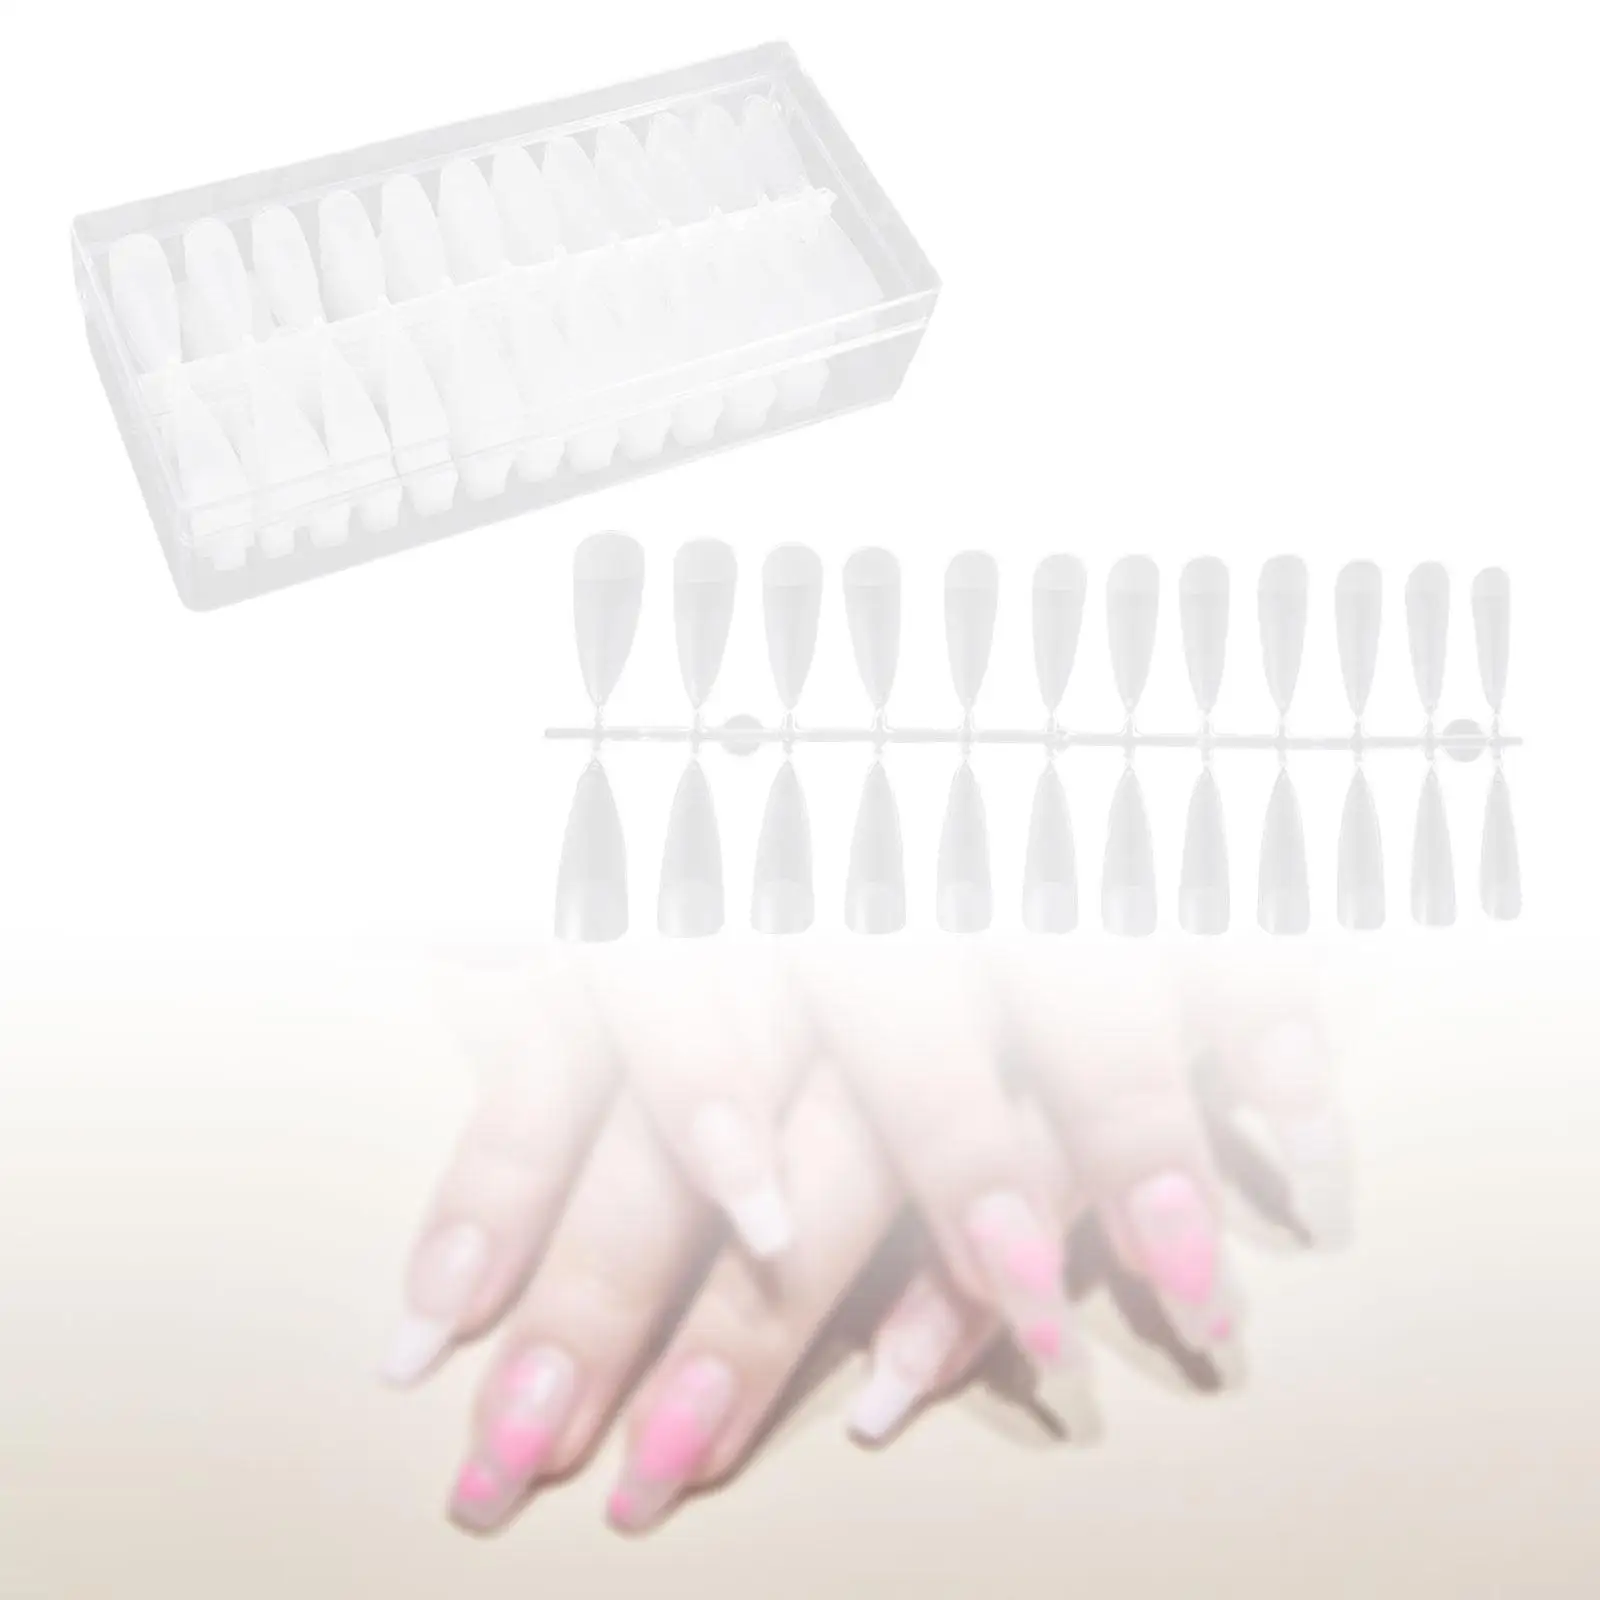 240x Gel Nail Tips 10-12 Sizes Nails Art Clear for Soak Off Nail Extensions Fake Gel Nail Tips Nail Extensions Tips for Home DIY